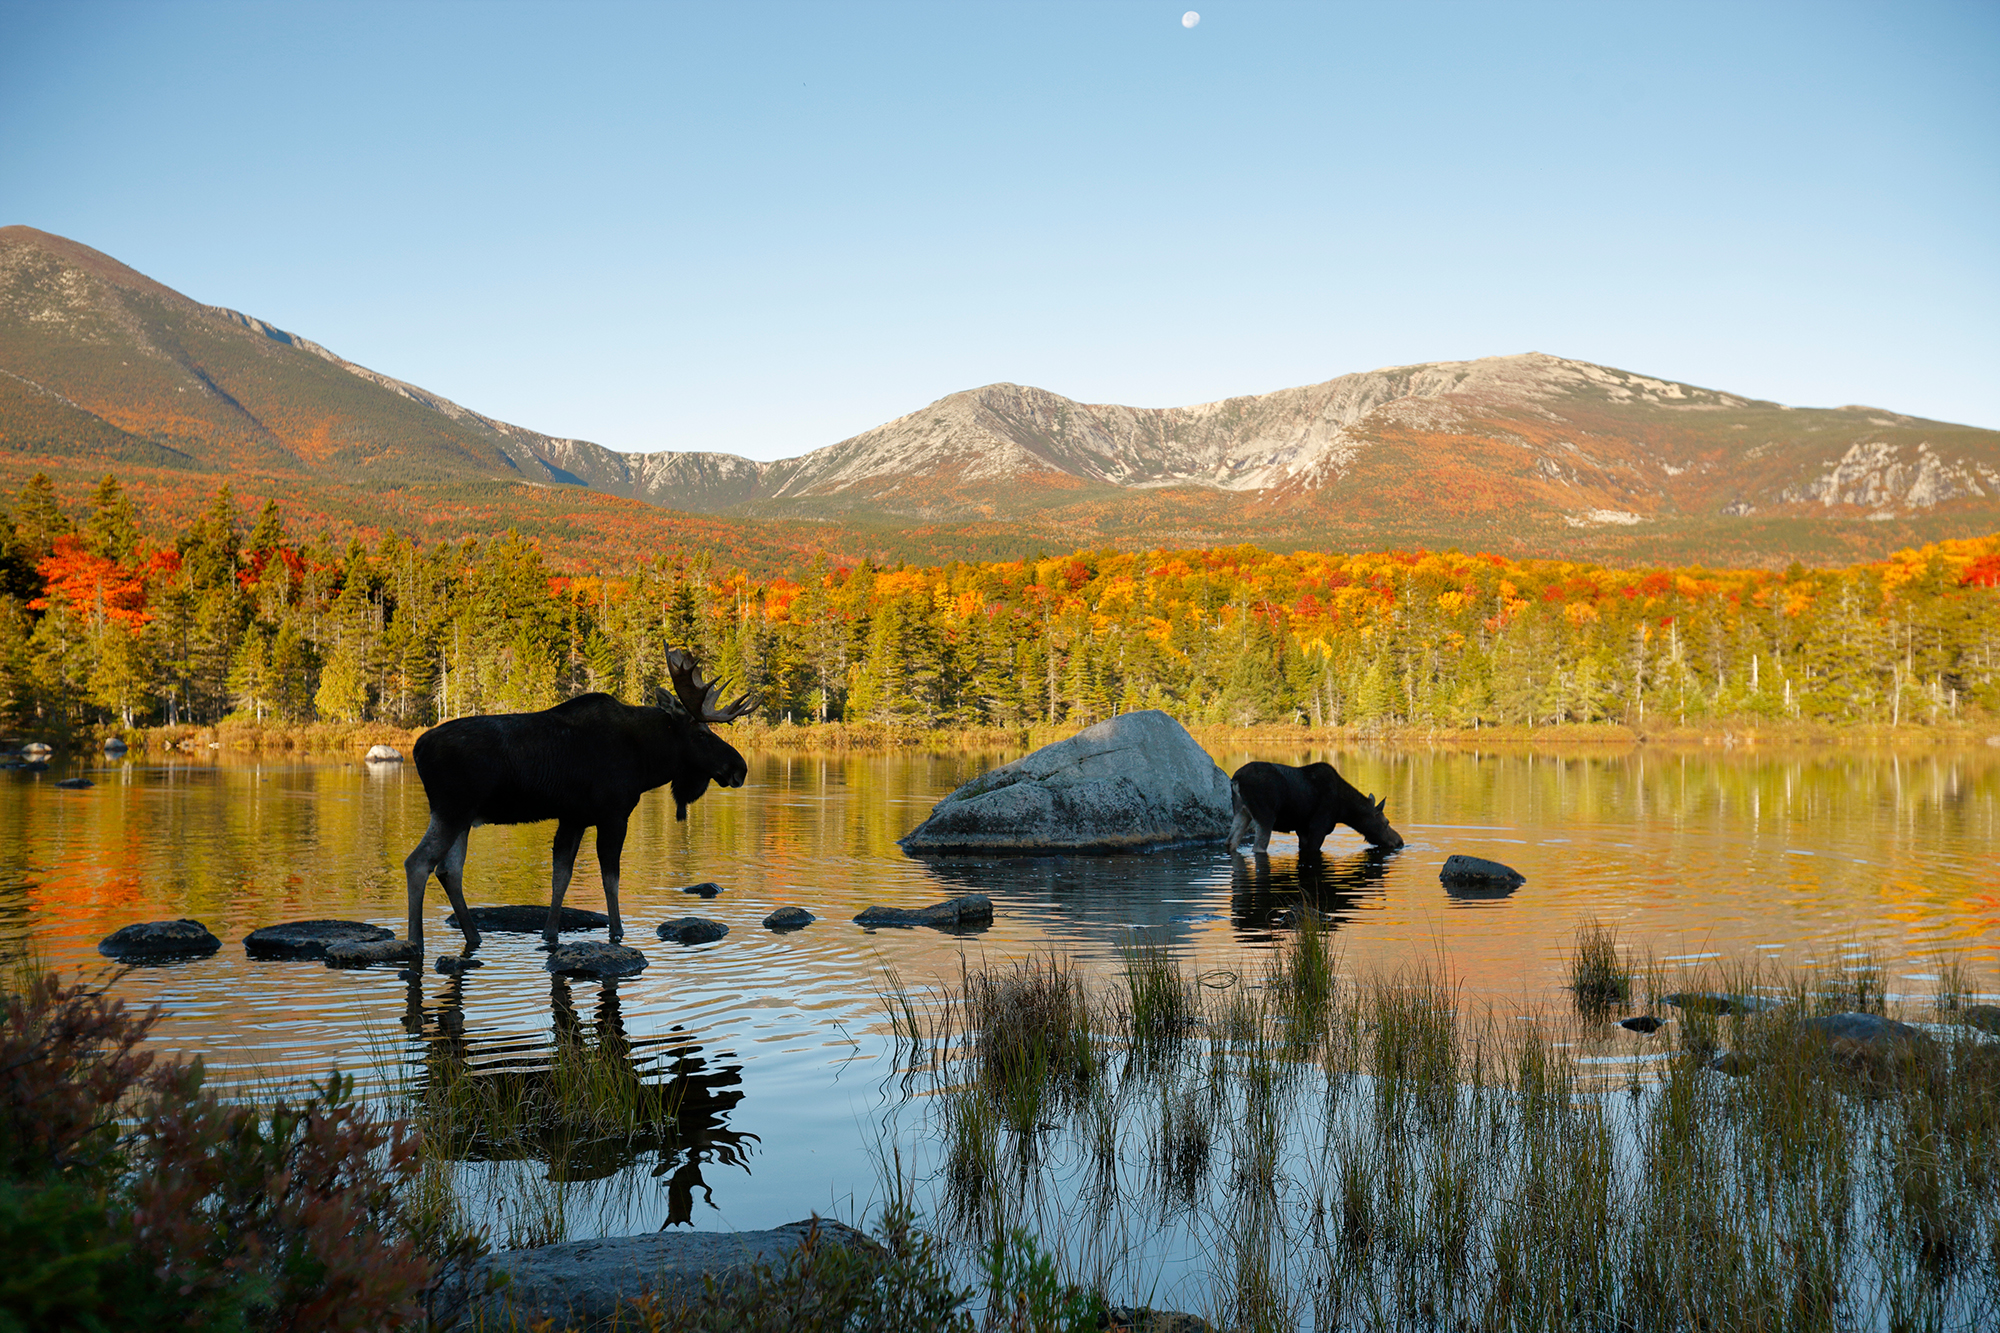 Two moose silhouetted against fall foliage surrounding a peaceful pond.